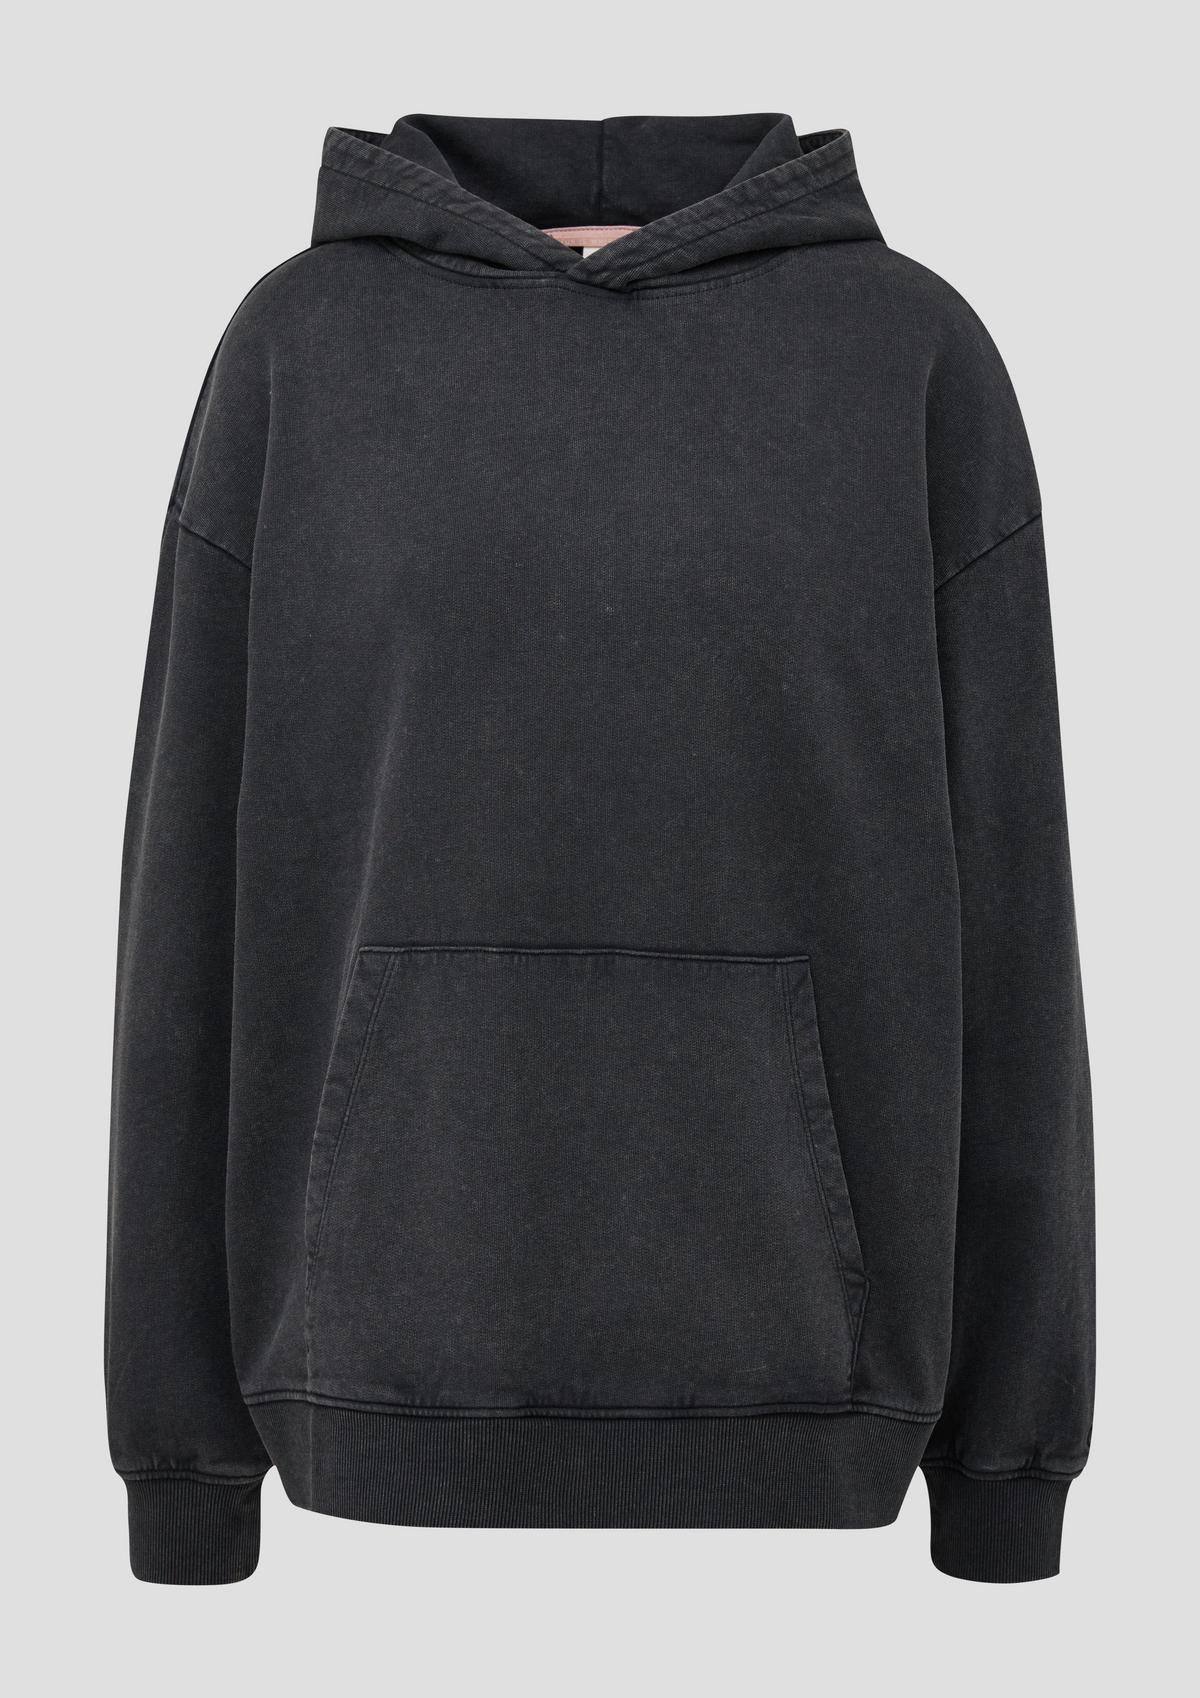 s.Oliver Sweatshirt with a garment-washed effect